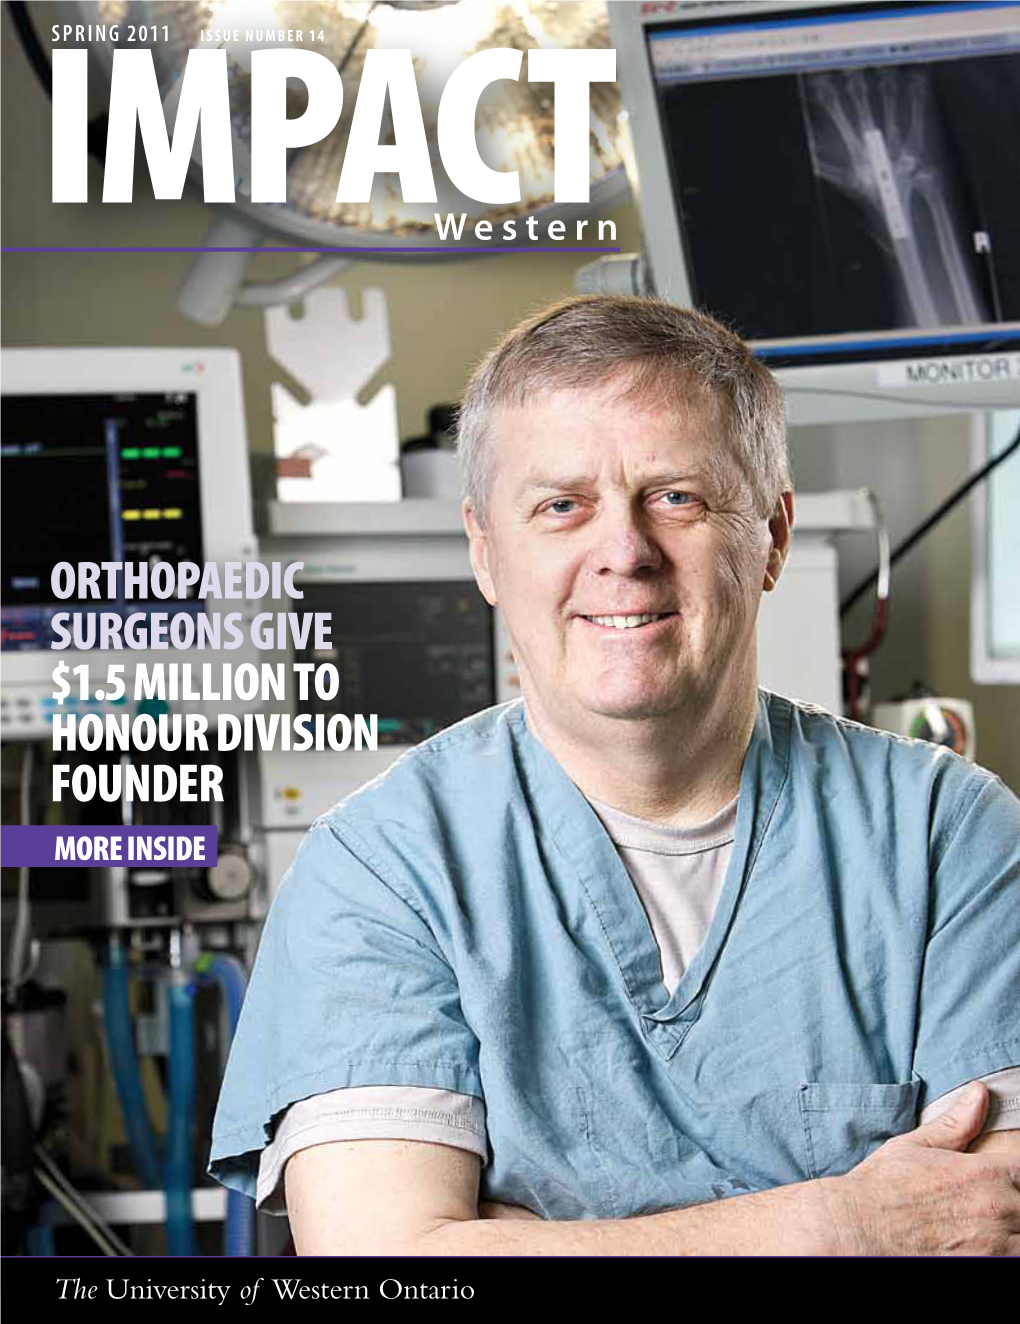 Orthopaedic Surgeons Give $1.5 Million to Honour Division Founder More Inside 02 | Impact Western Spring 2011 Issue Number 14